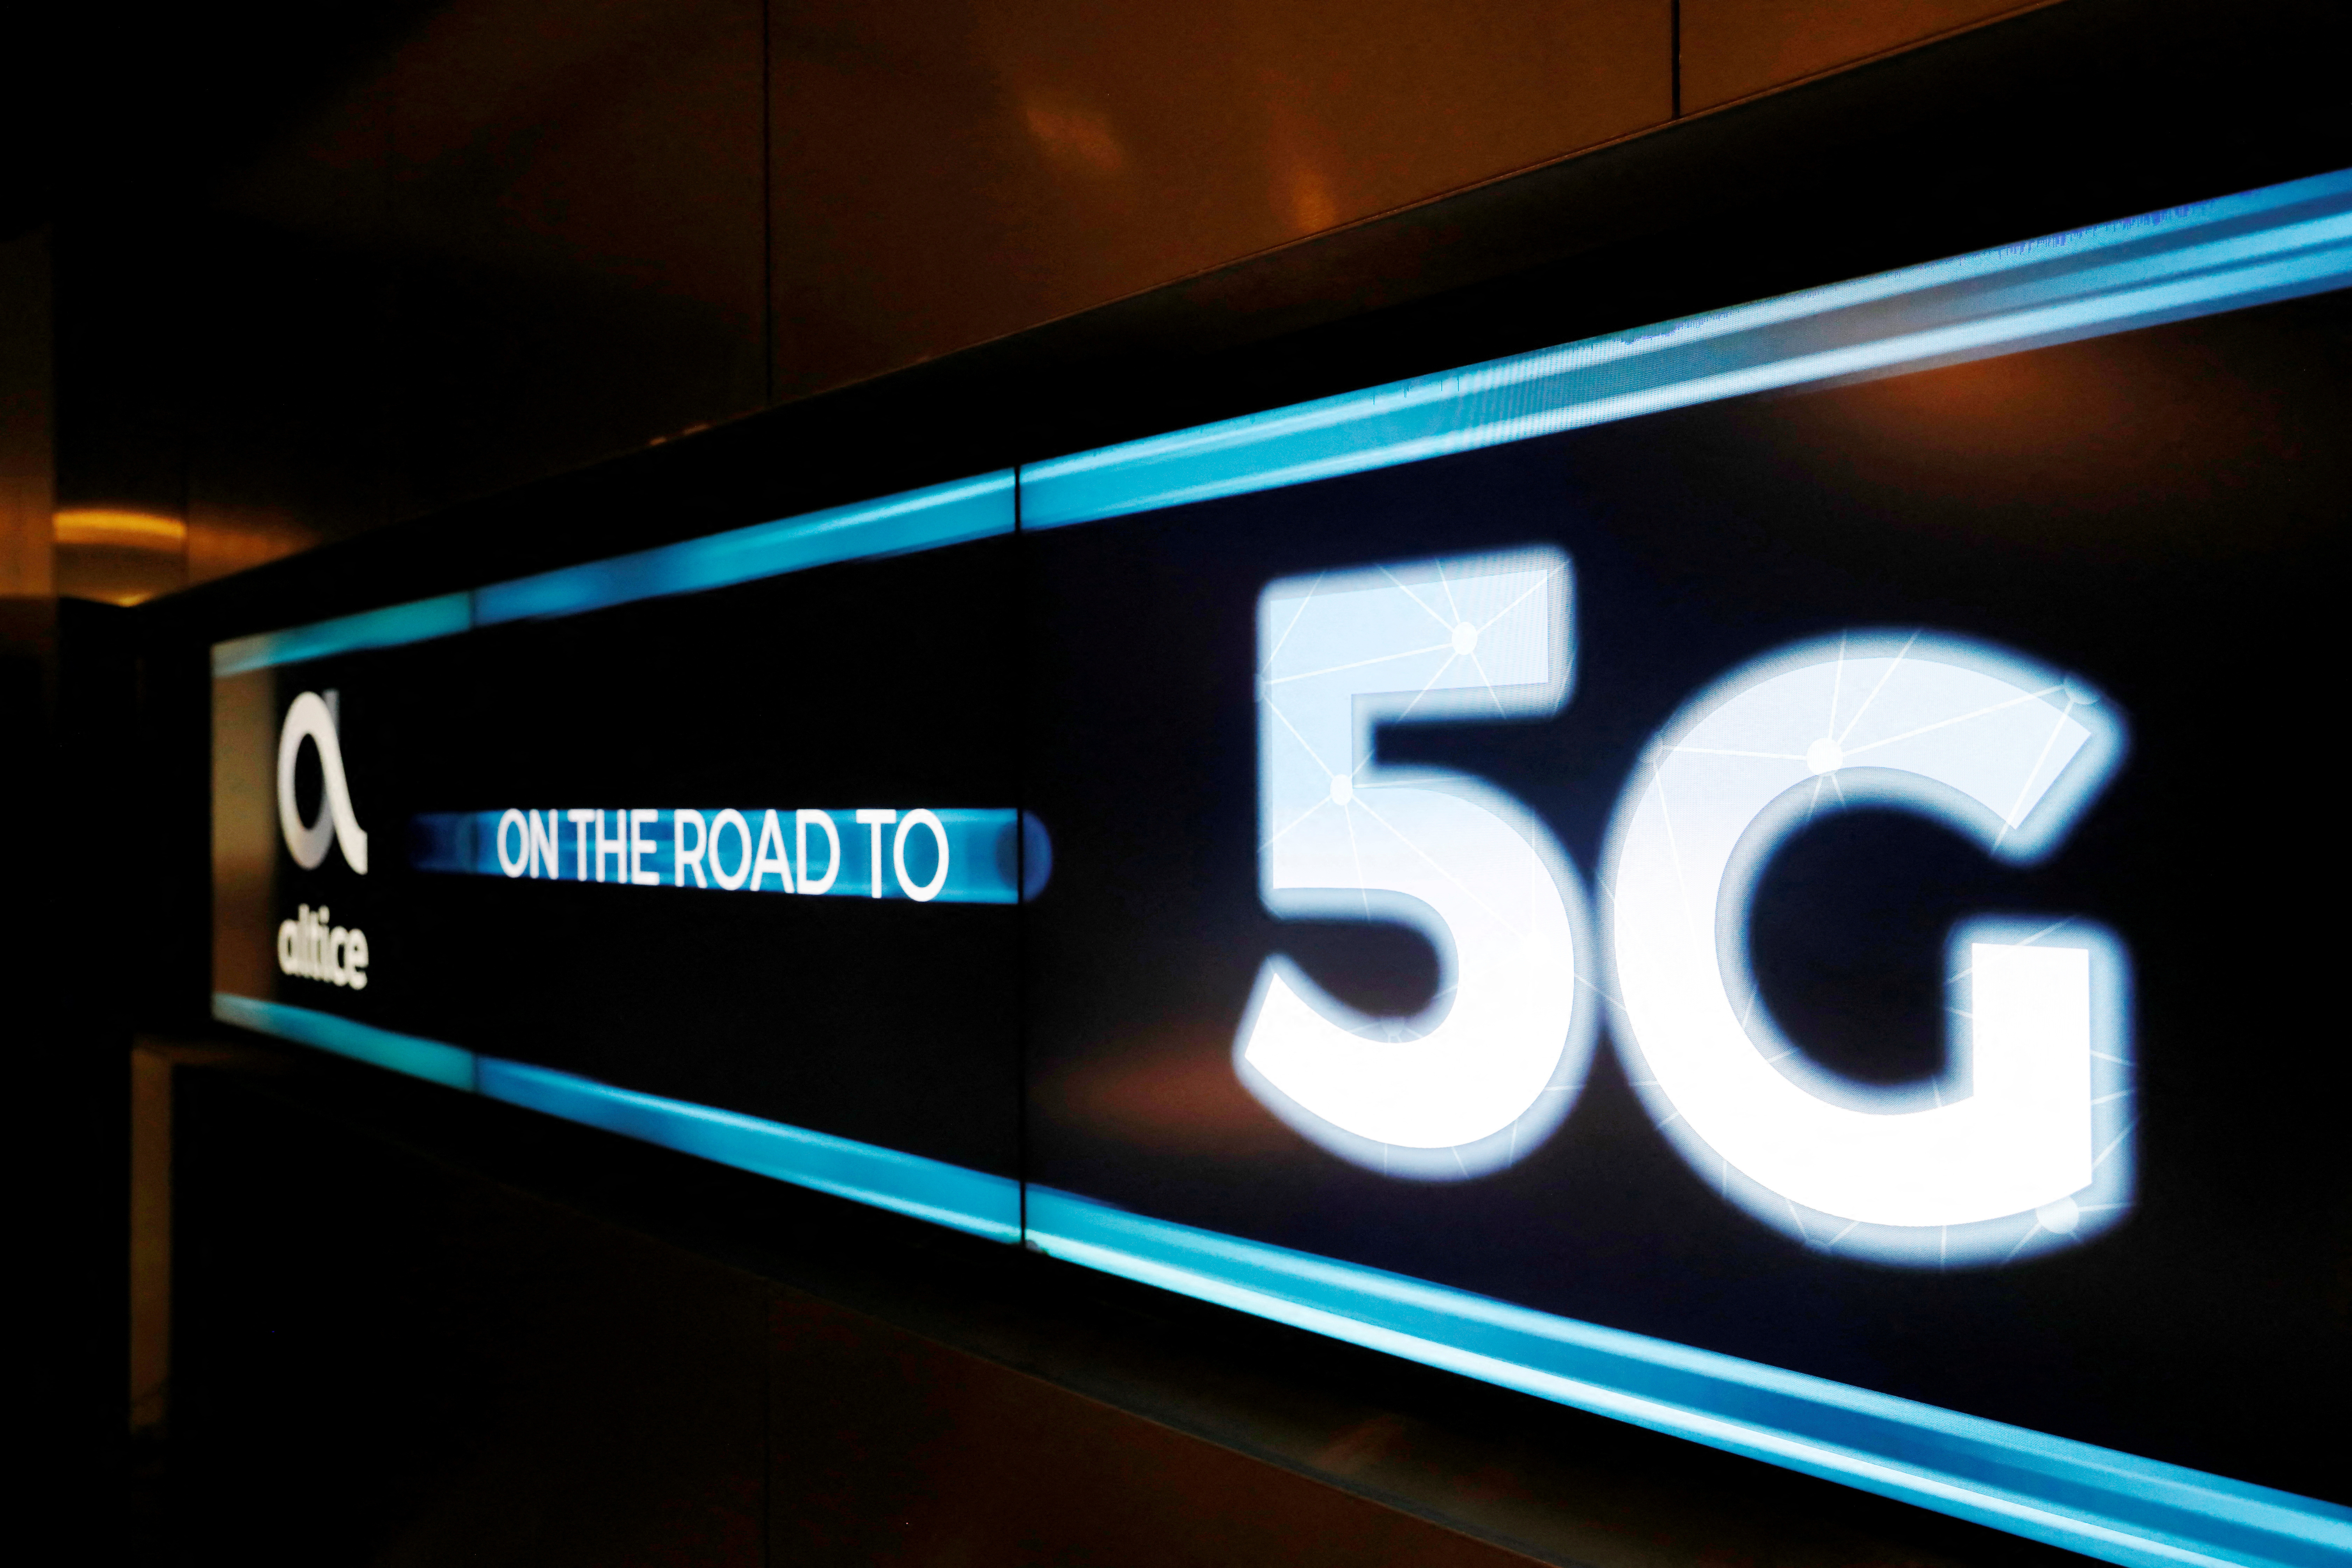 An advertising board is seen during the first demonstration of the technology 5G in Lisbon